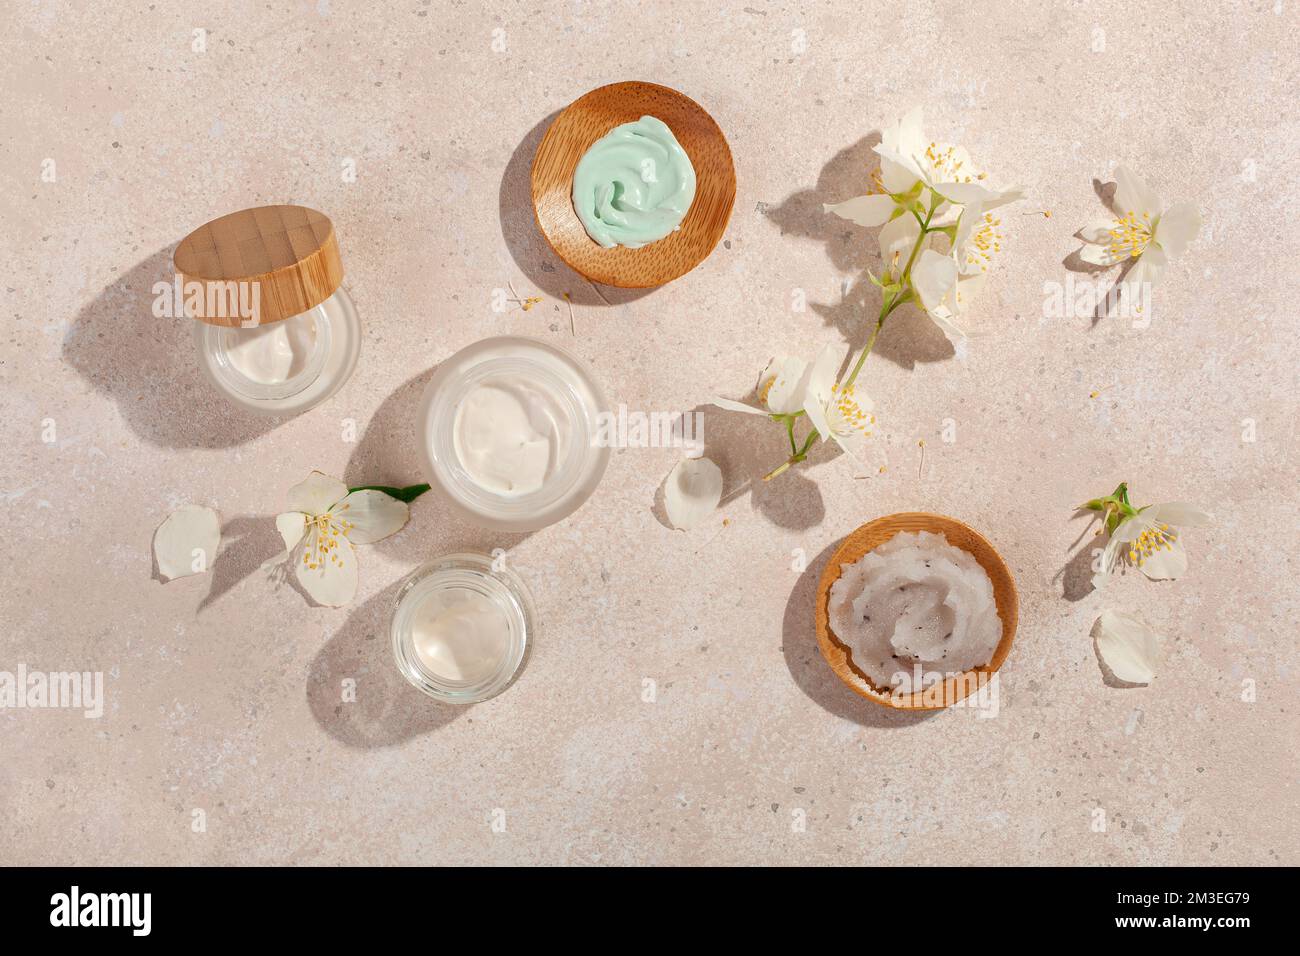 skincare products and jasmine flowers. natural cosmetics for home spa treatment Stock Photo